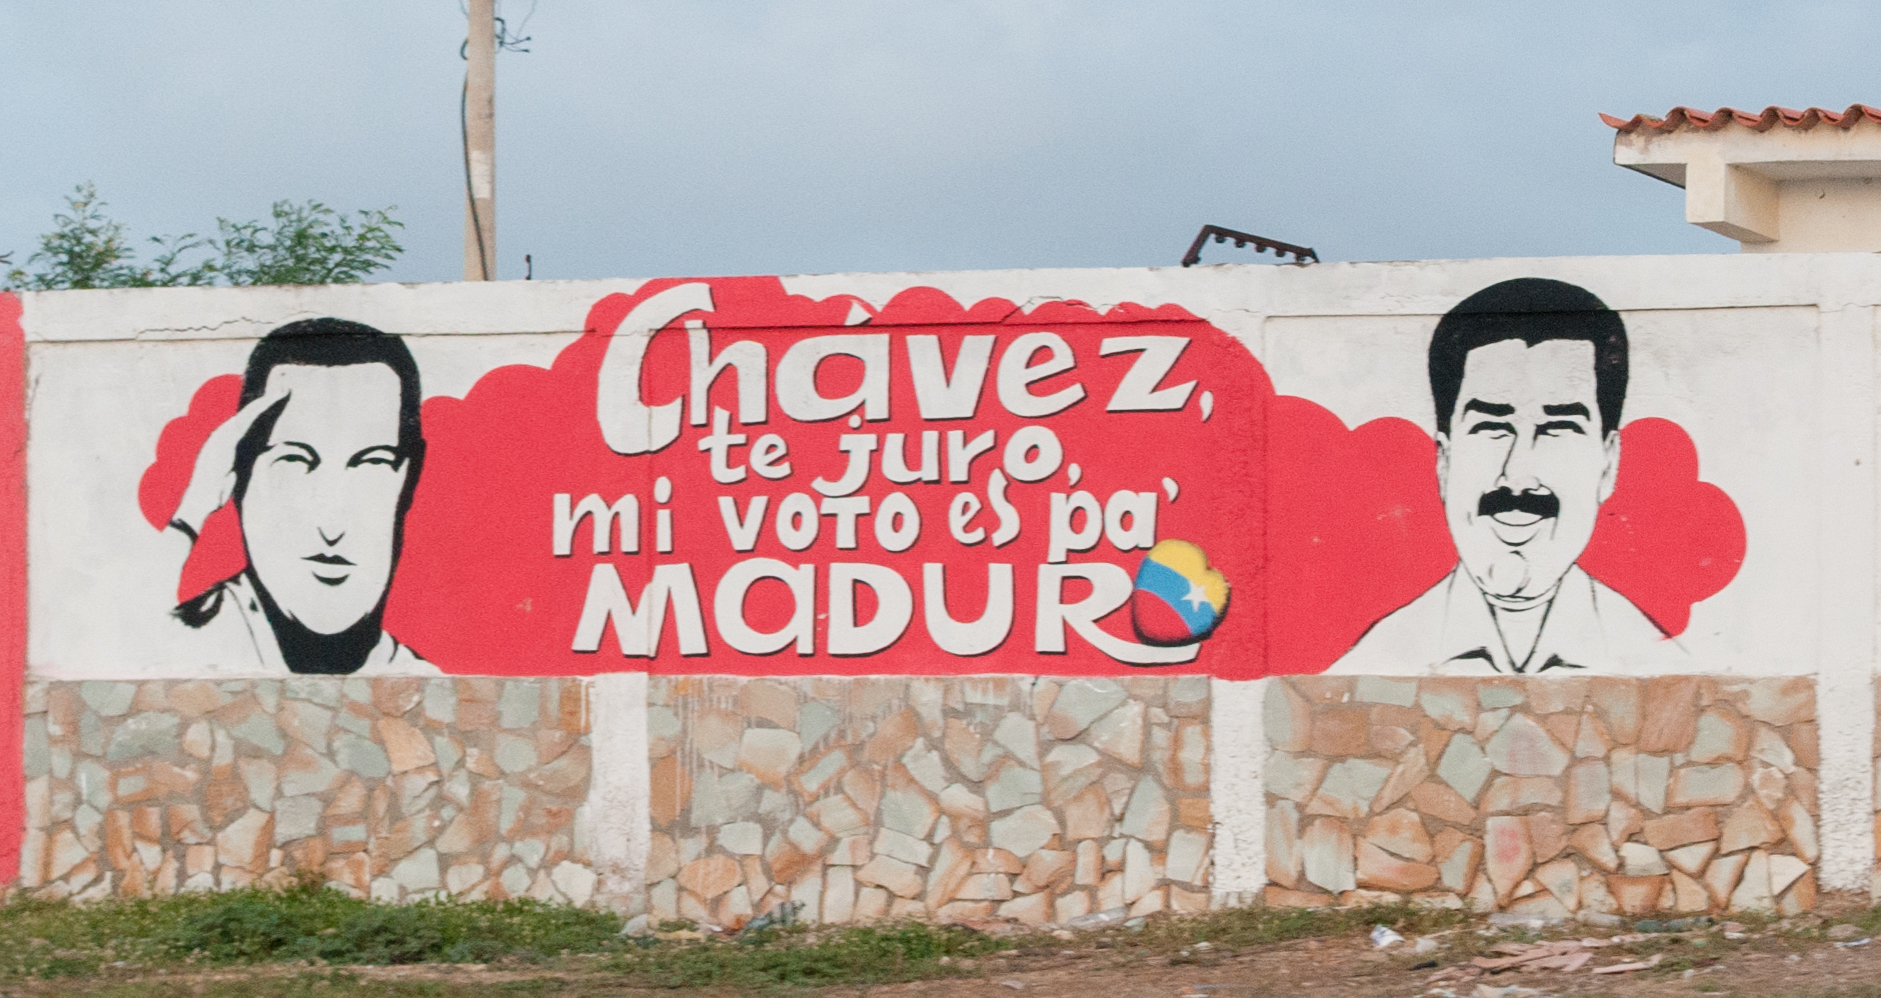 “Chavez, I swear, I will vote for Maduro,” sign on wall in 2013. (Wikimedia)